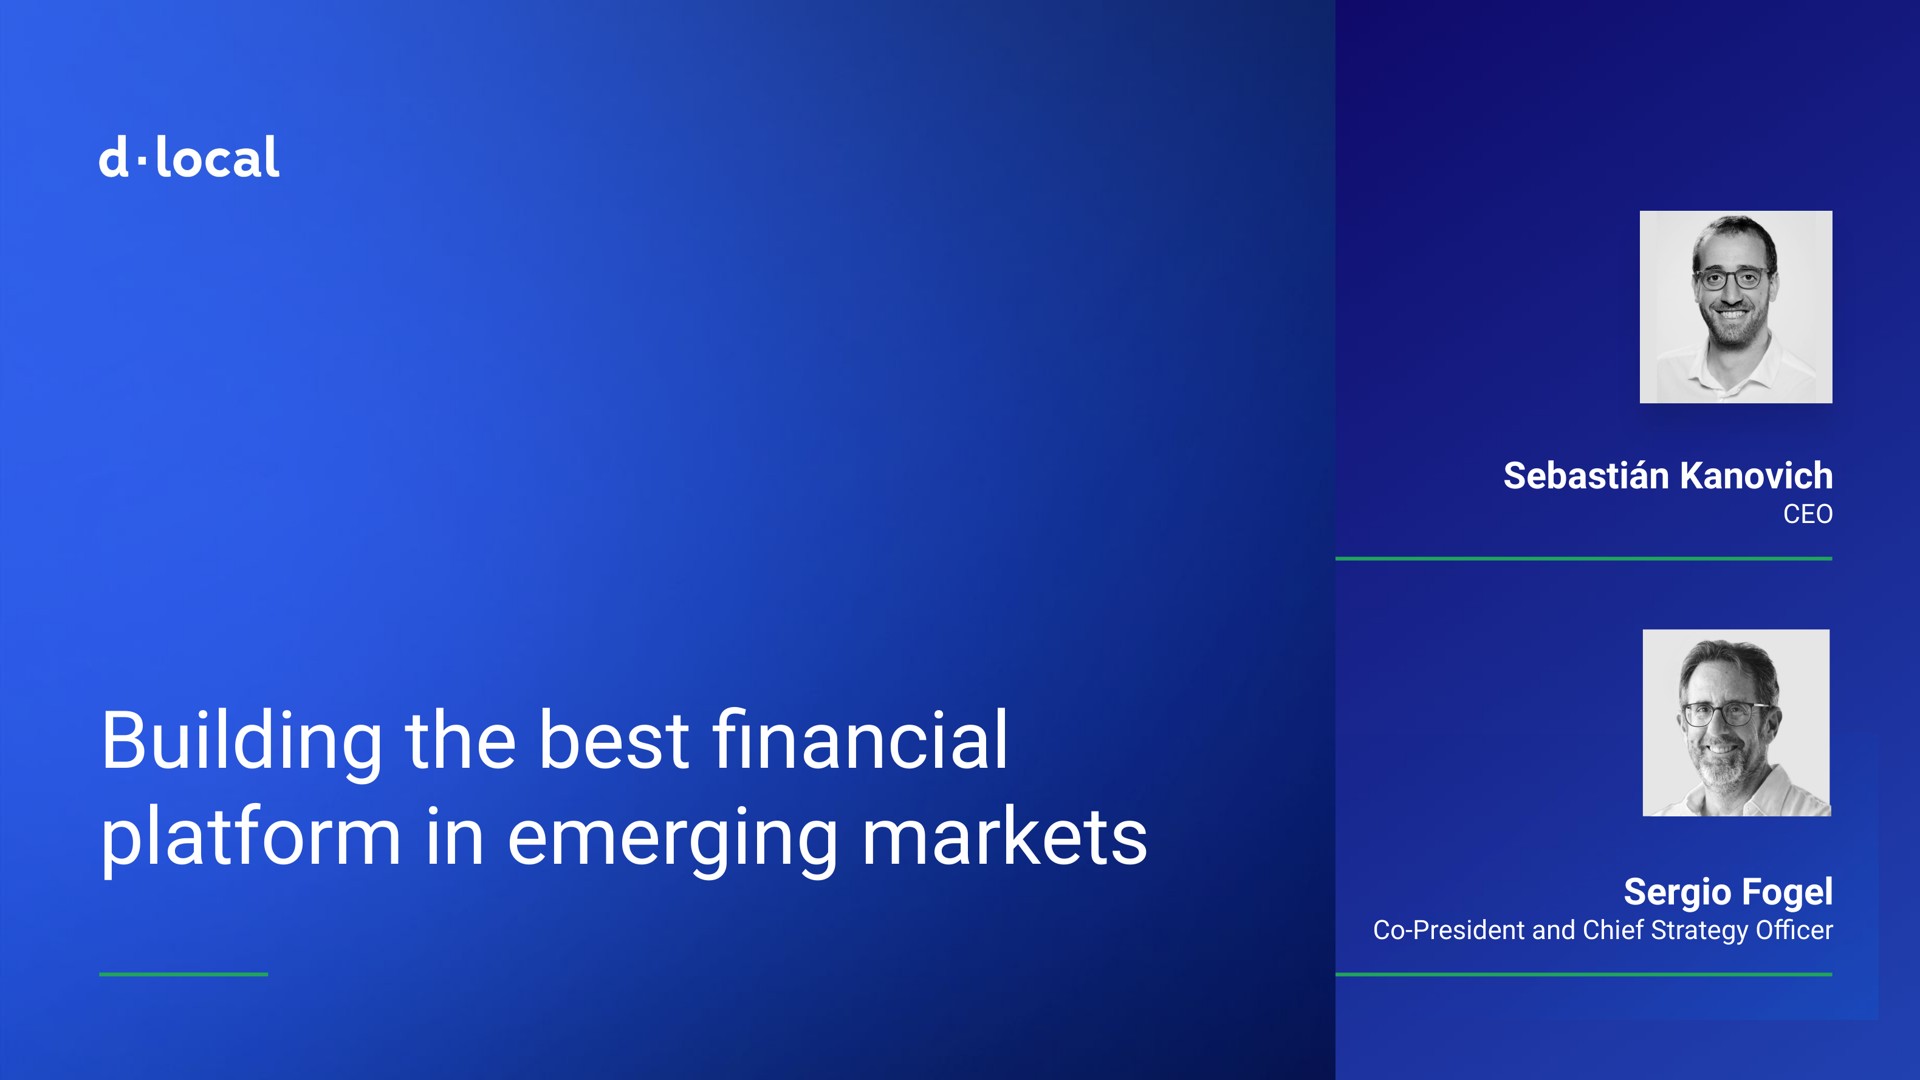 building the best platform in emerging markets president and chief strategy local financial officer | dLocal